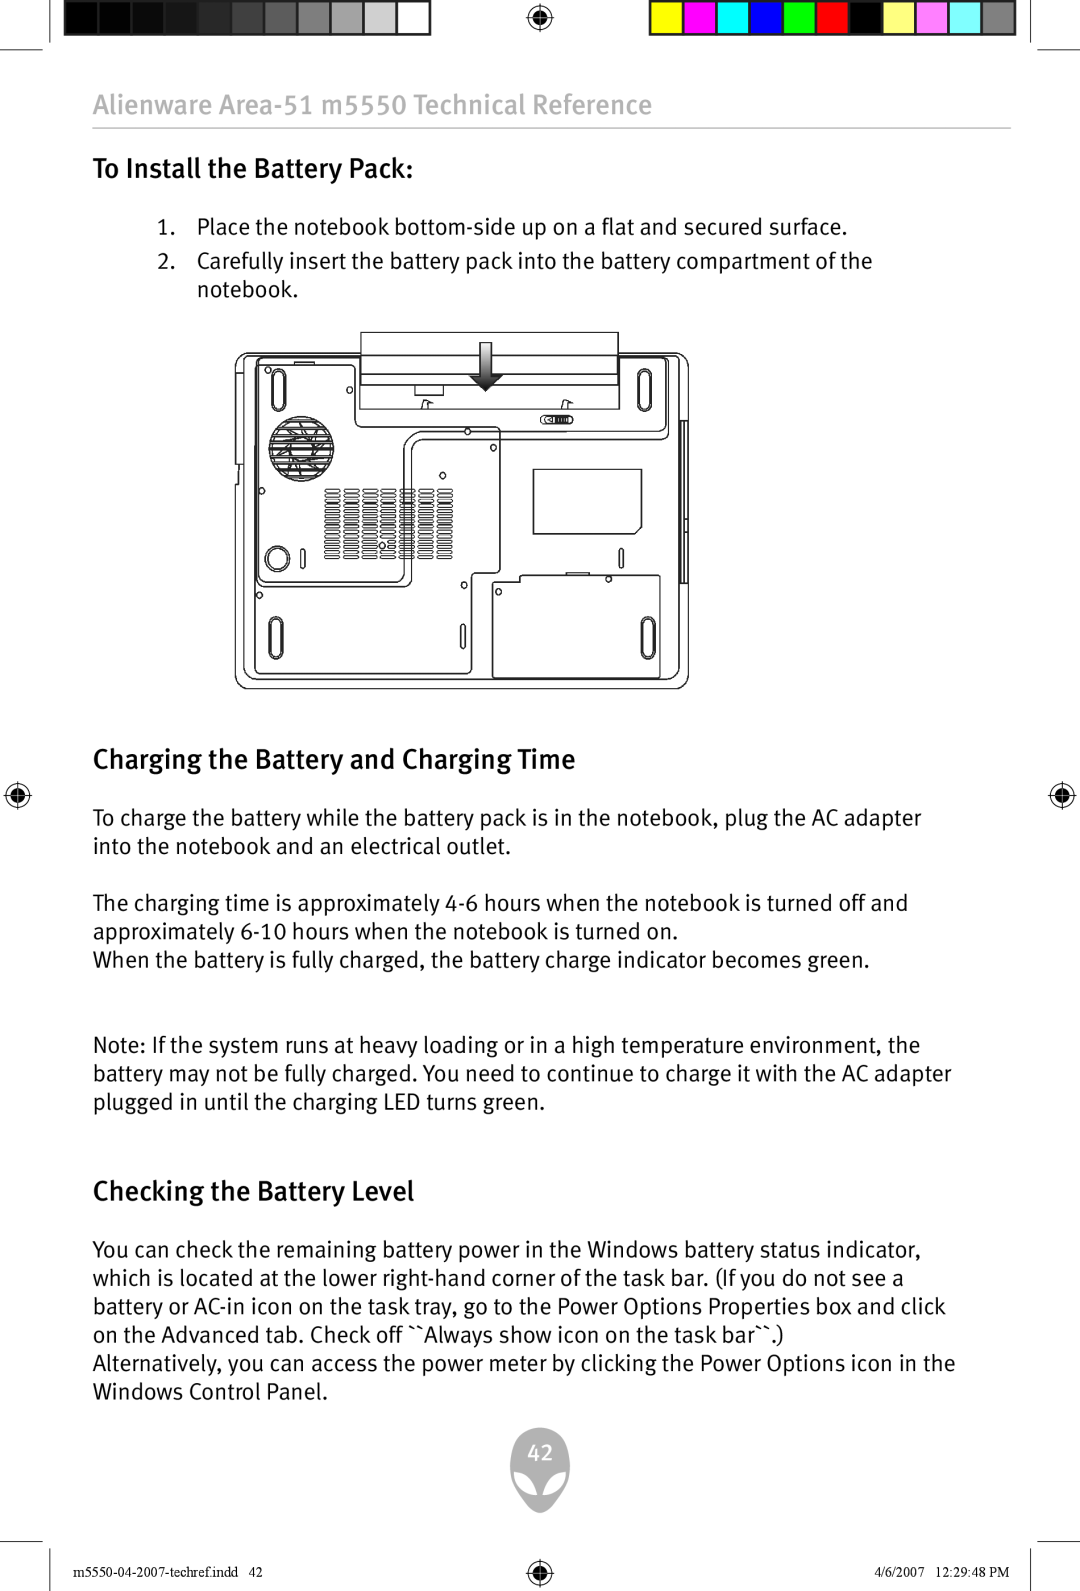 Alienware m5550 user manual To Install the Battery Pack, Charging the Battery and Charging Time, Checking the Battery Level 